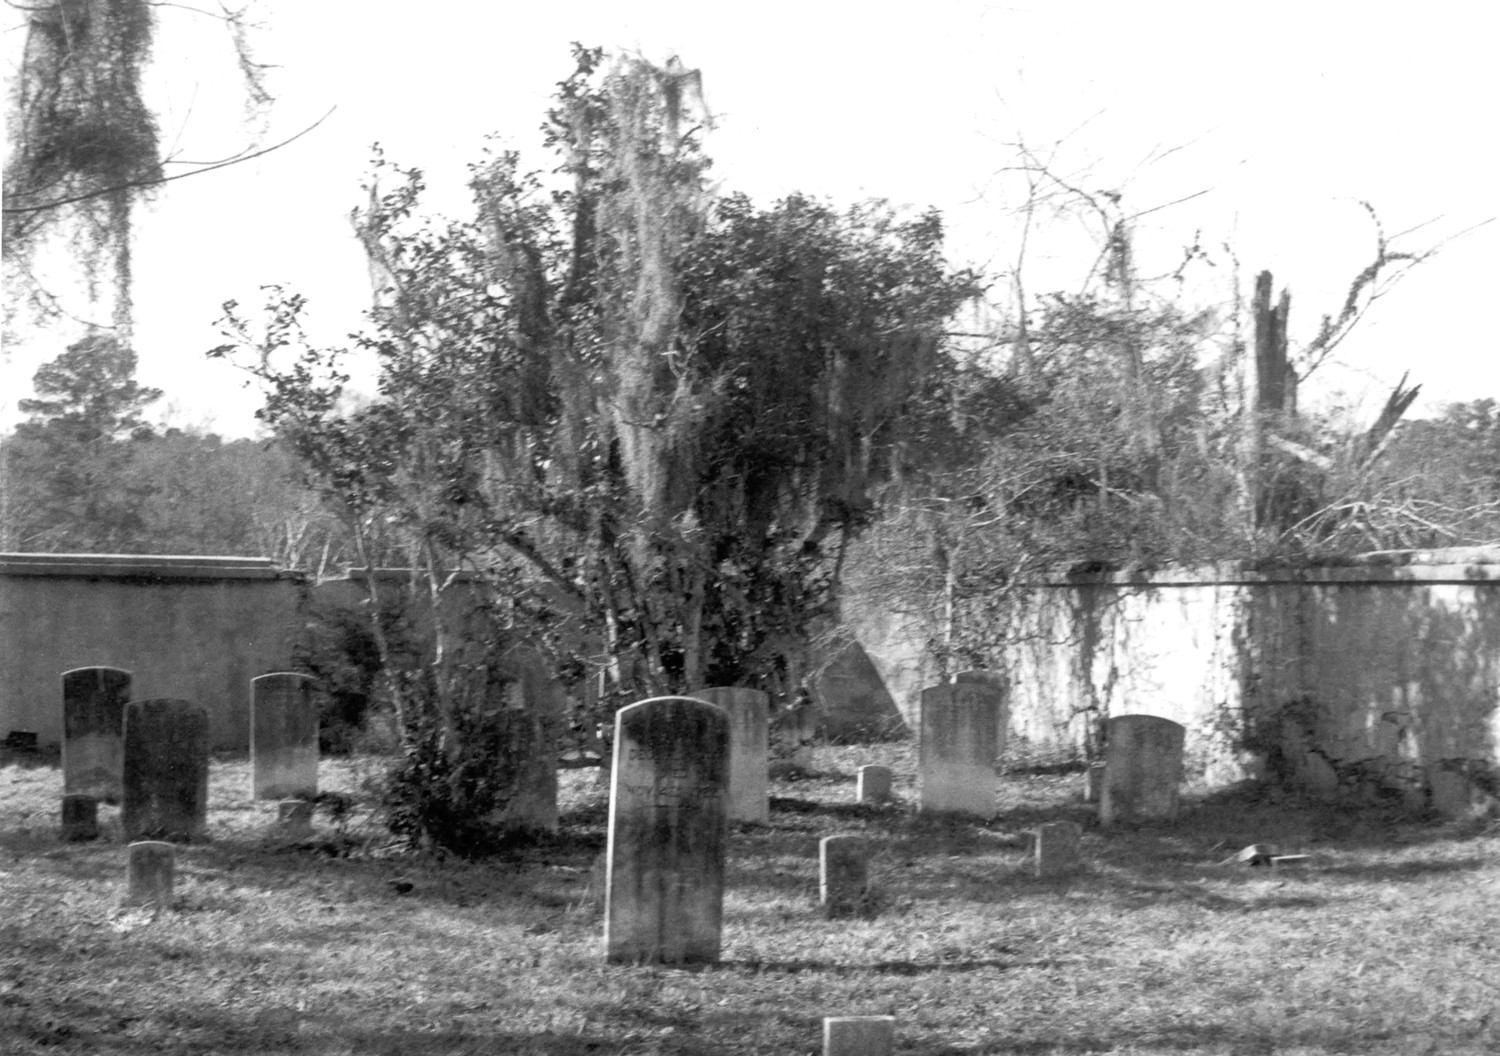 Cottage Plantation, St. Francisville Louisiana Cemetery: Walled, 40 ft. by 55 ft (1973)